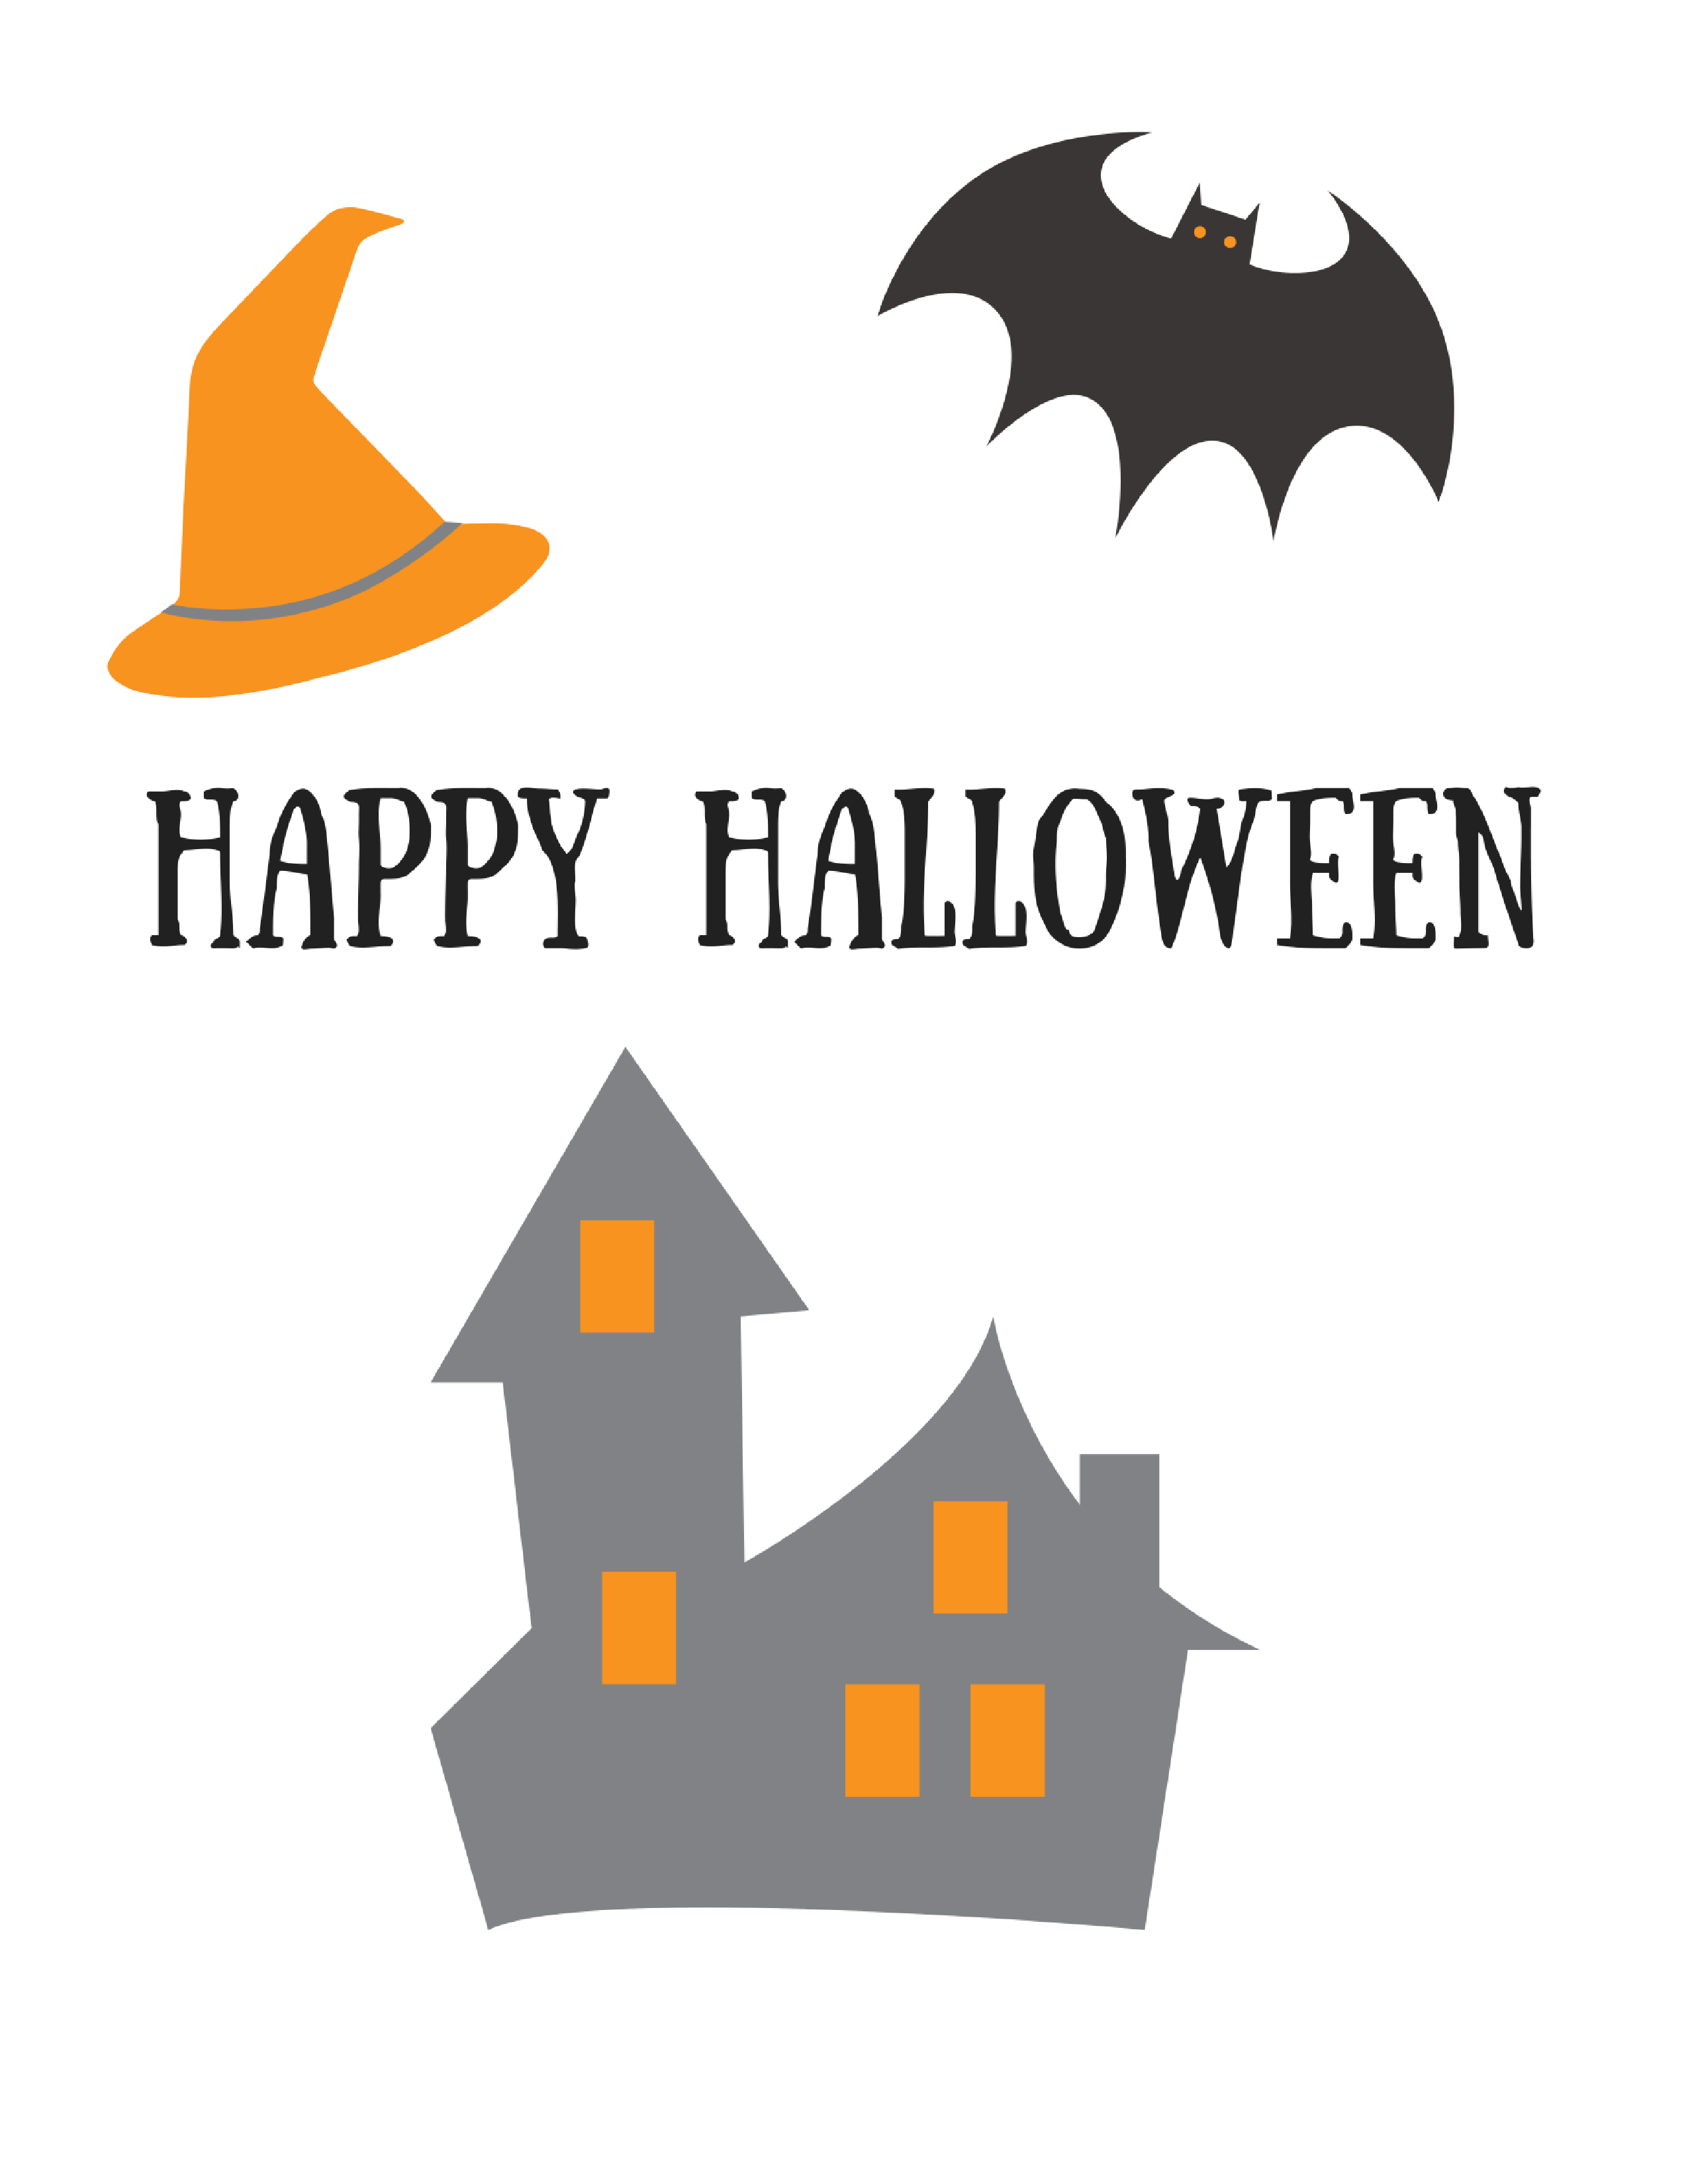 8 FREE Halloween Printables The Little Frugal House